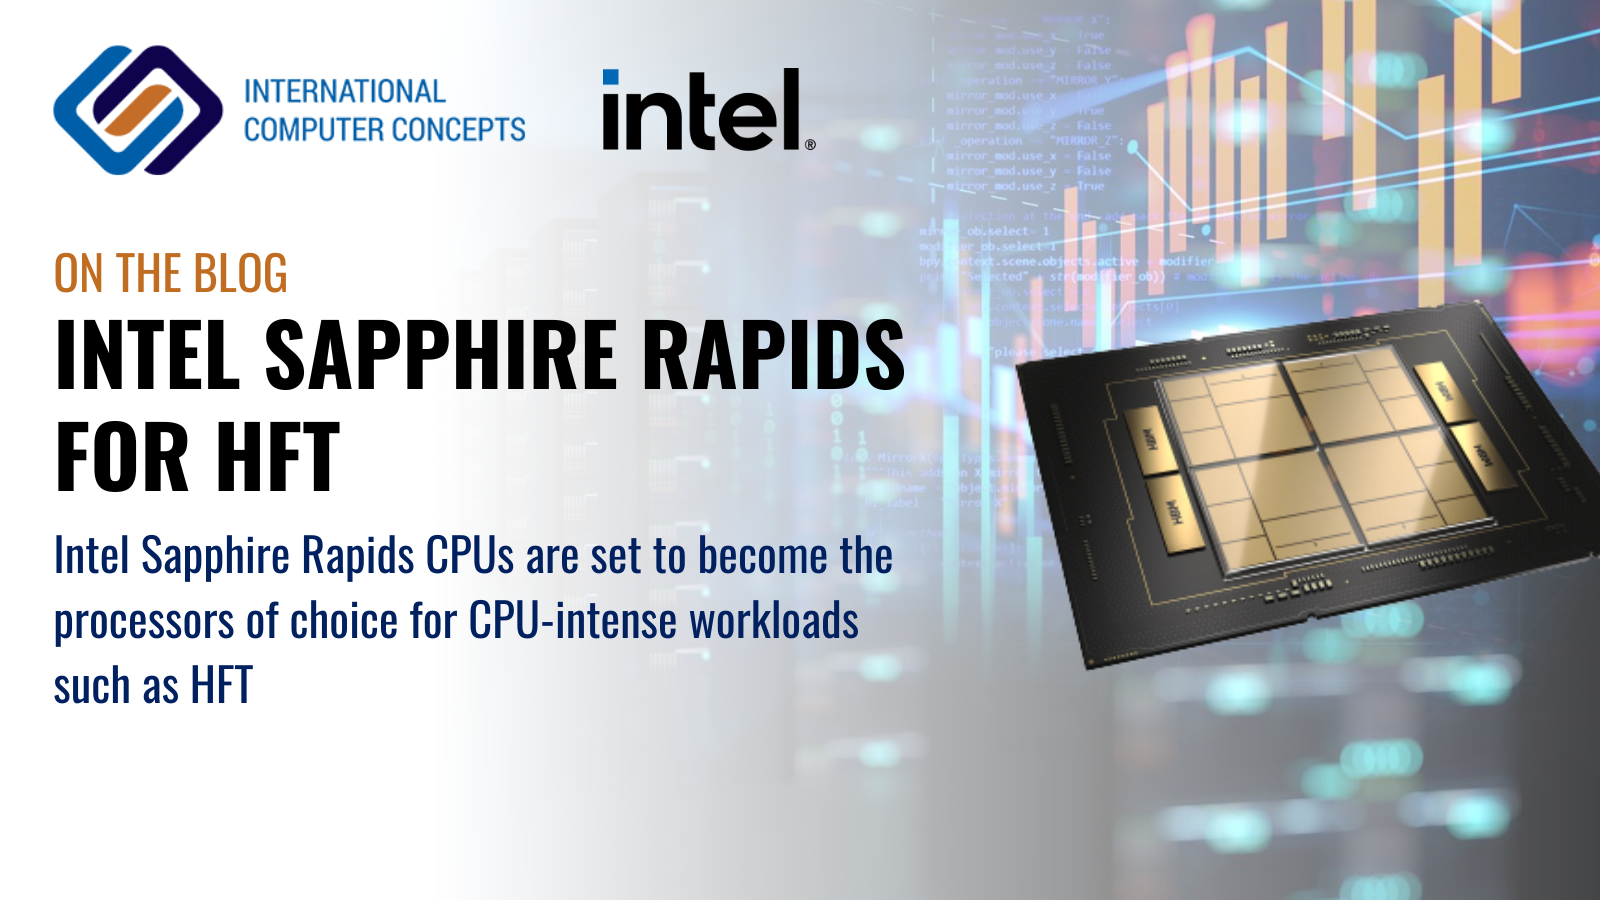 High Frequency Trading servers with Intel Sapphire Rapids